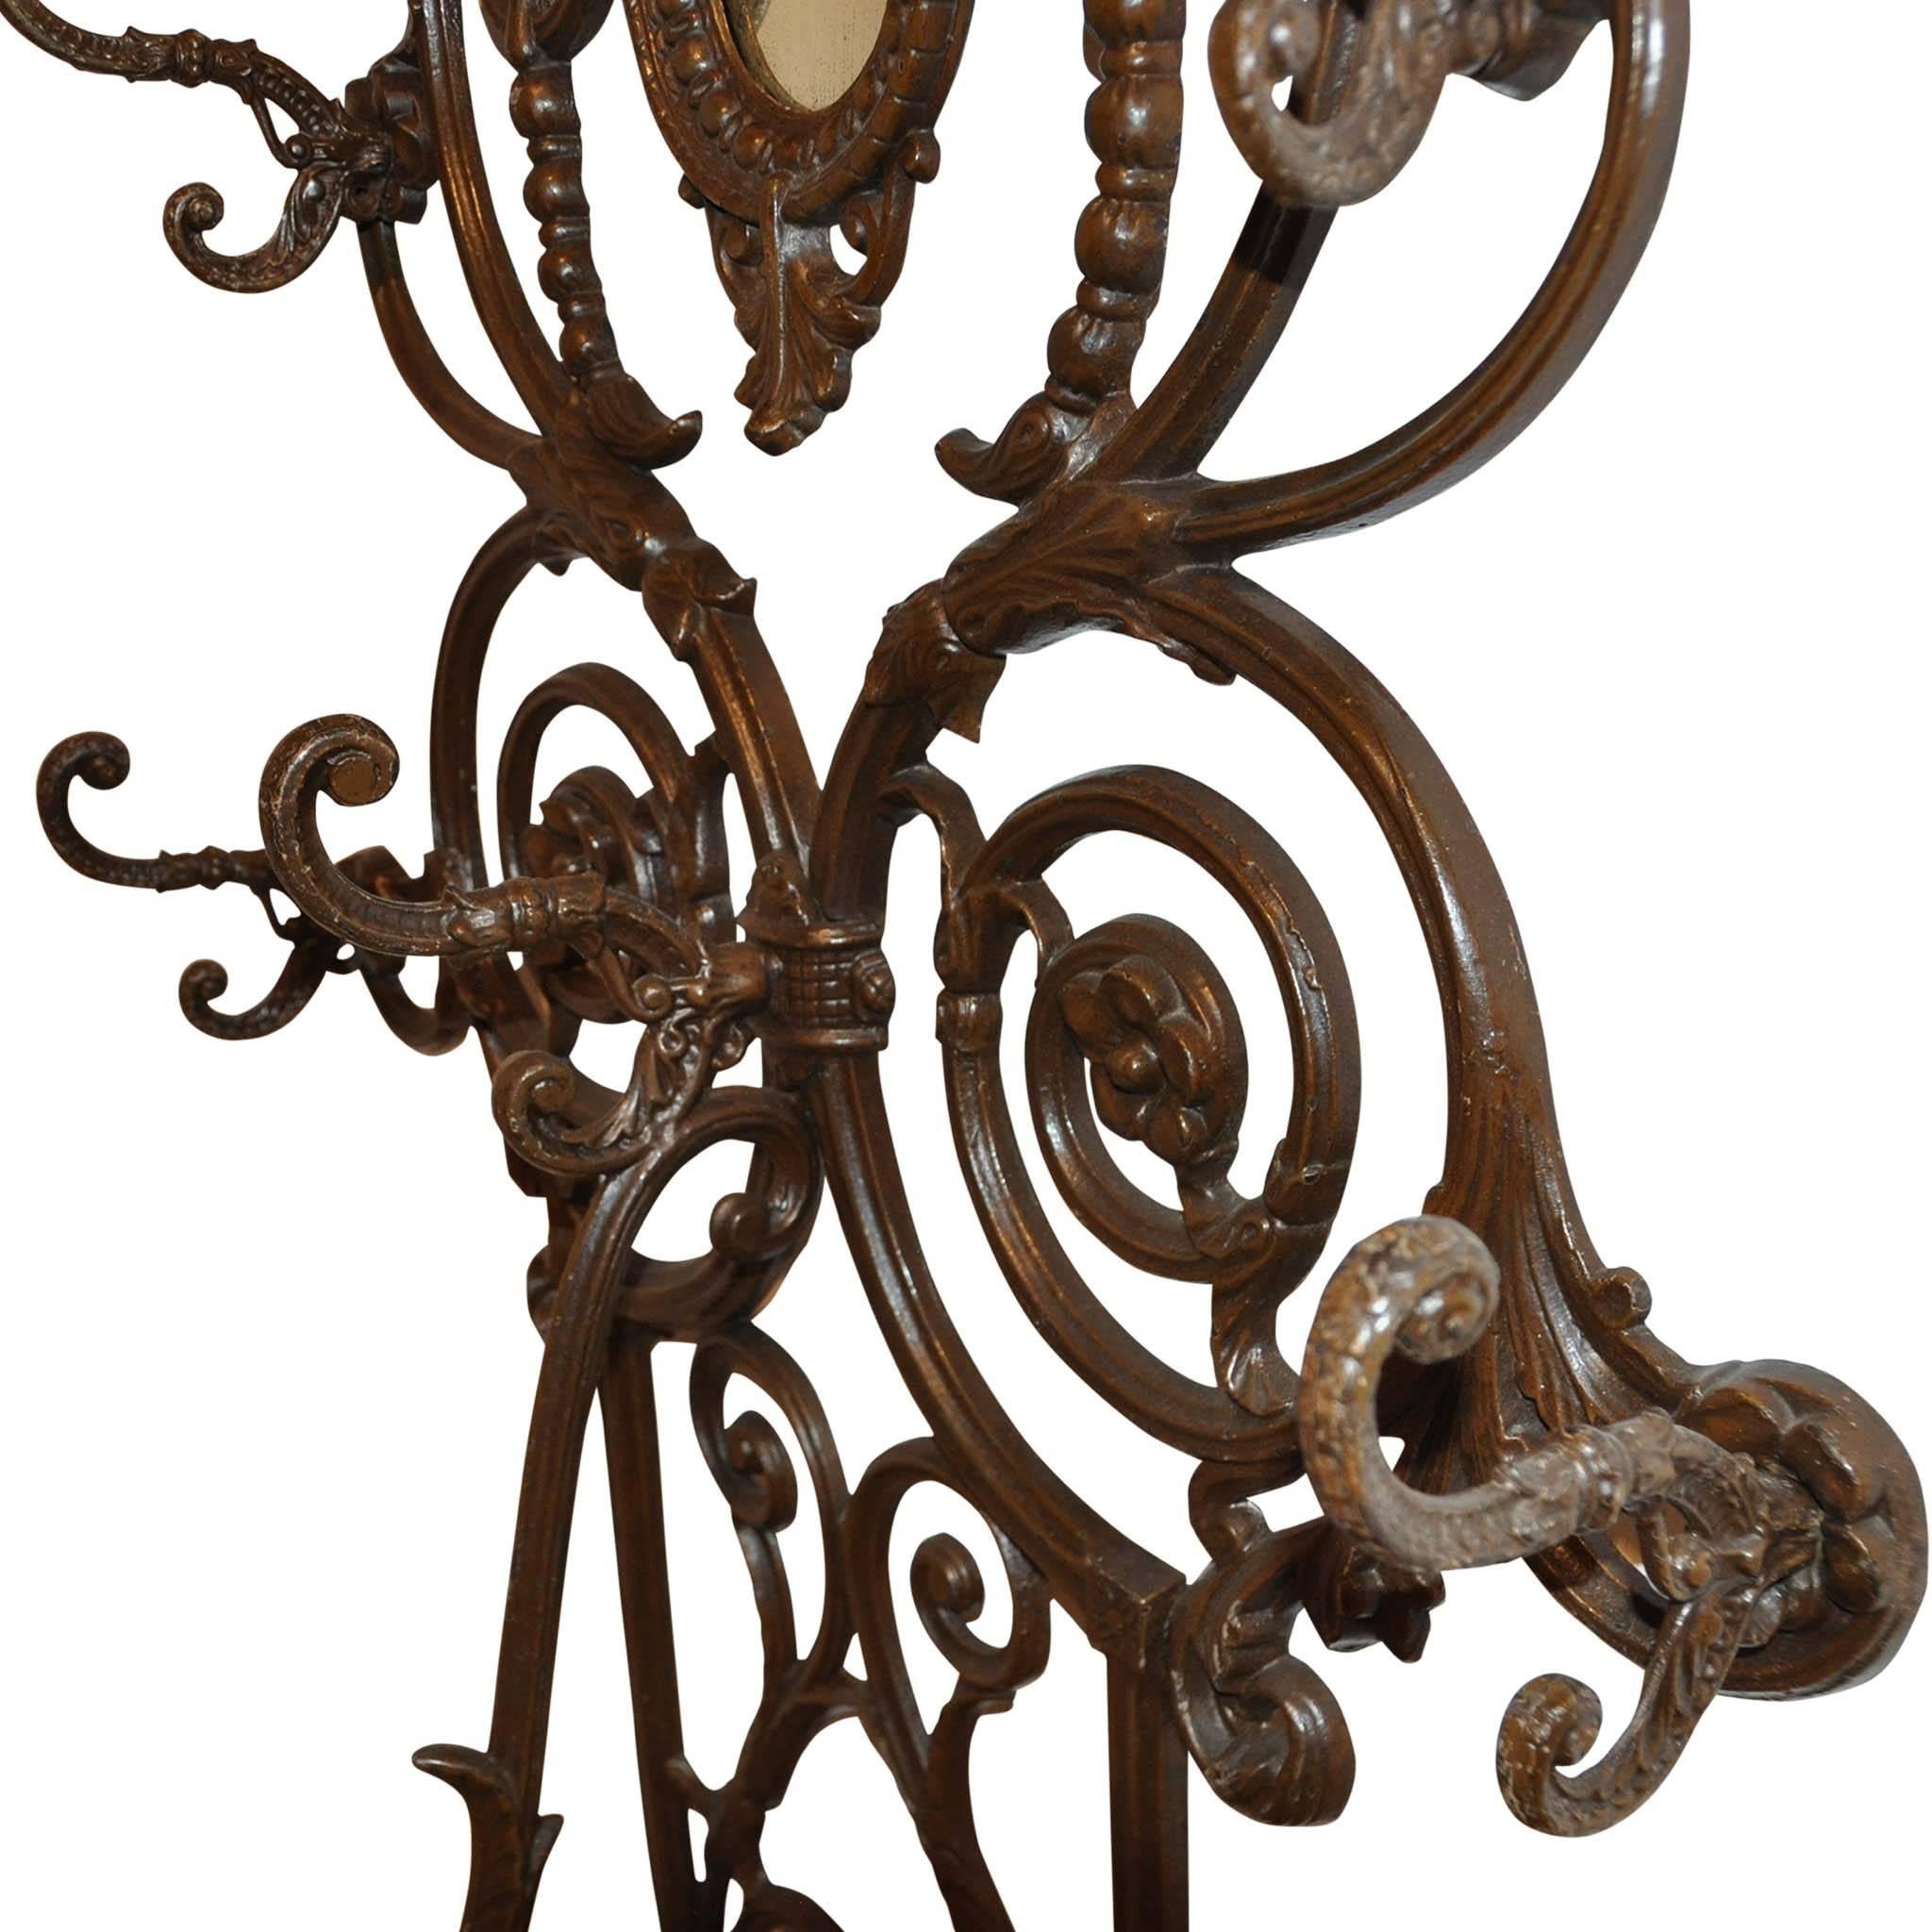 The elegant design includes flowers, acanthus leaves, and scrolling. It has eight double hooks, an oval mirror, and a removable drip pan in the umbrella stand.